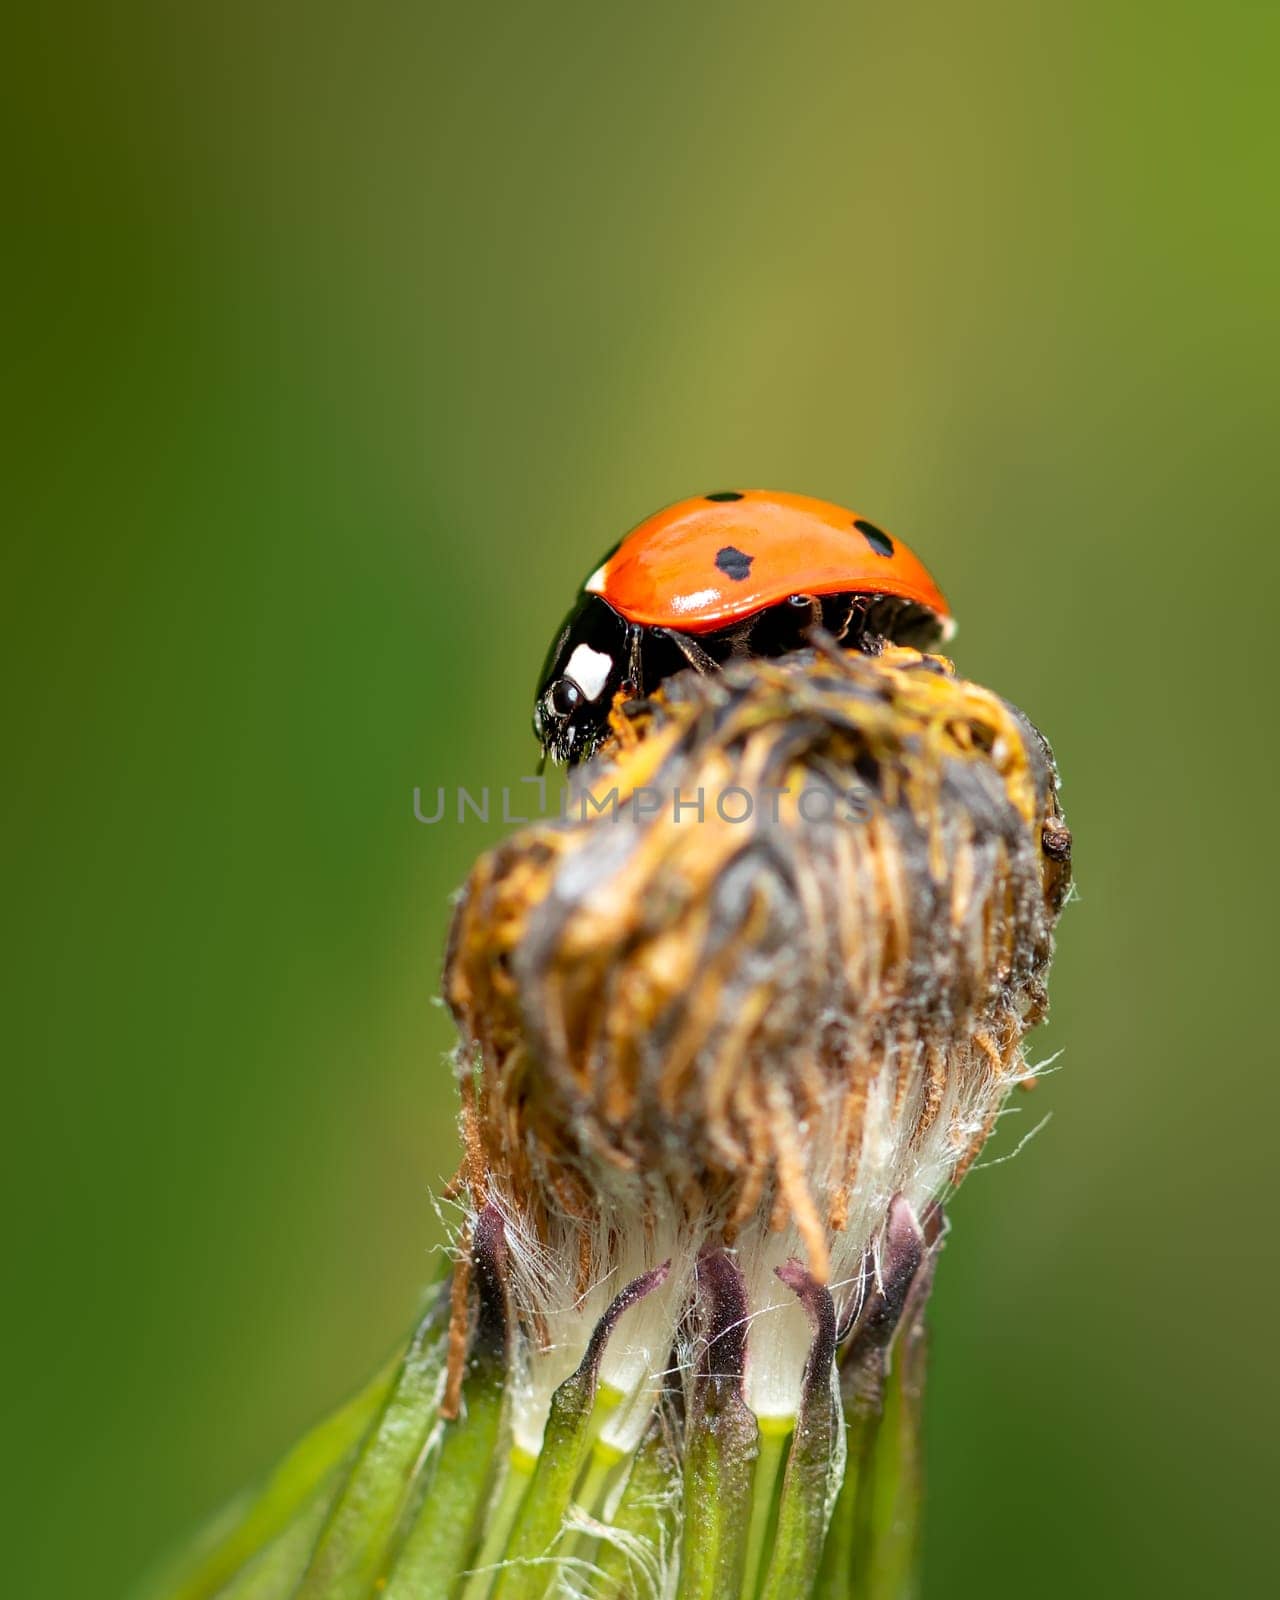 Red ladybug insect sitting on a flower bud by Millenn